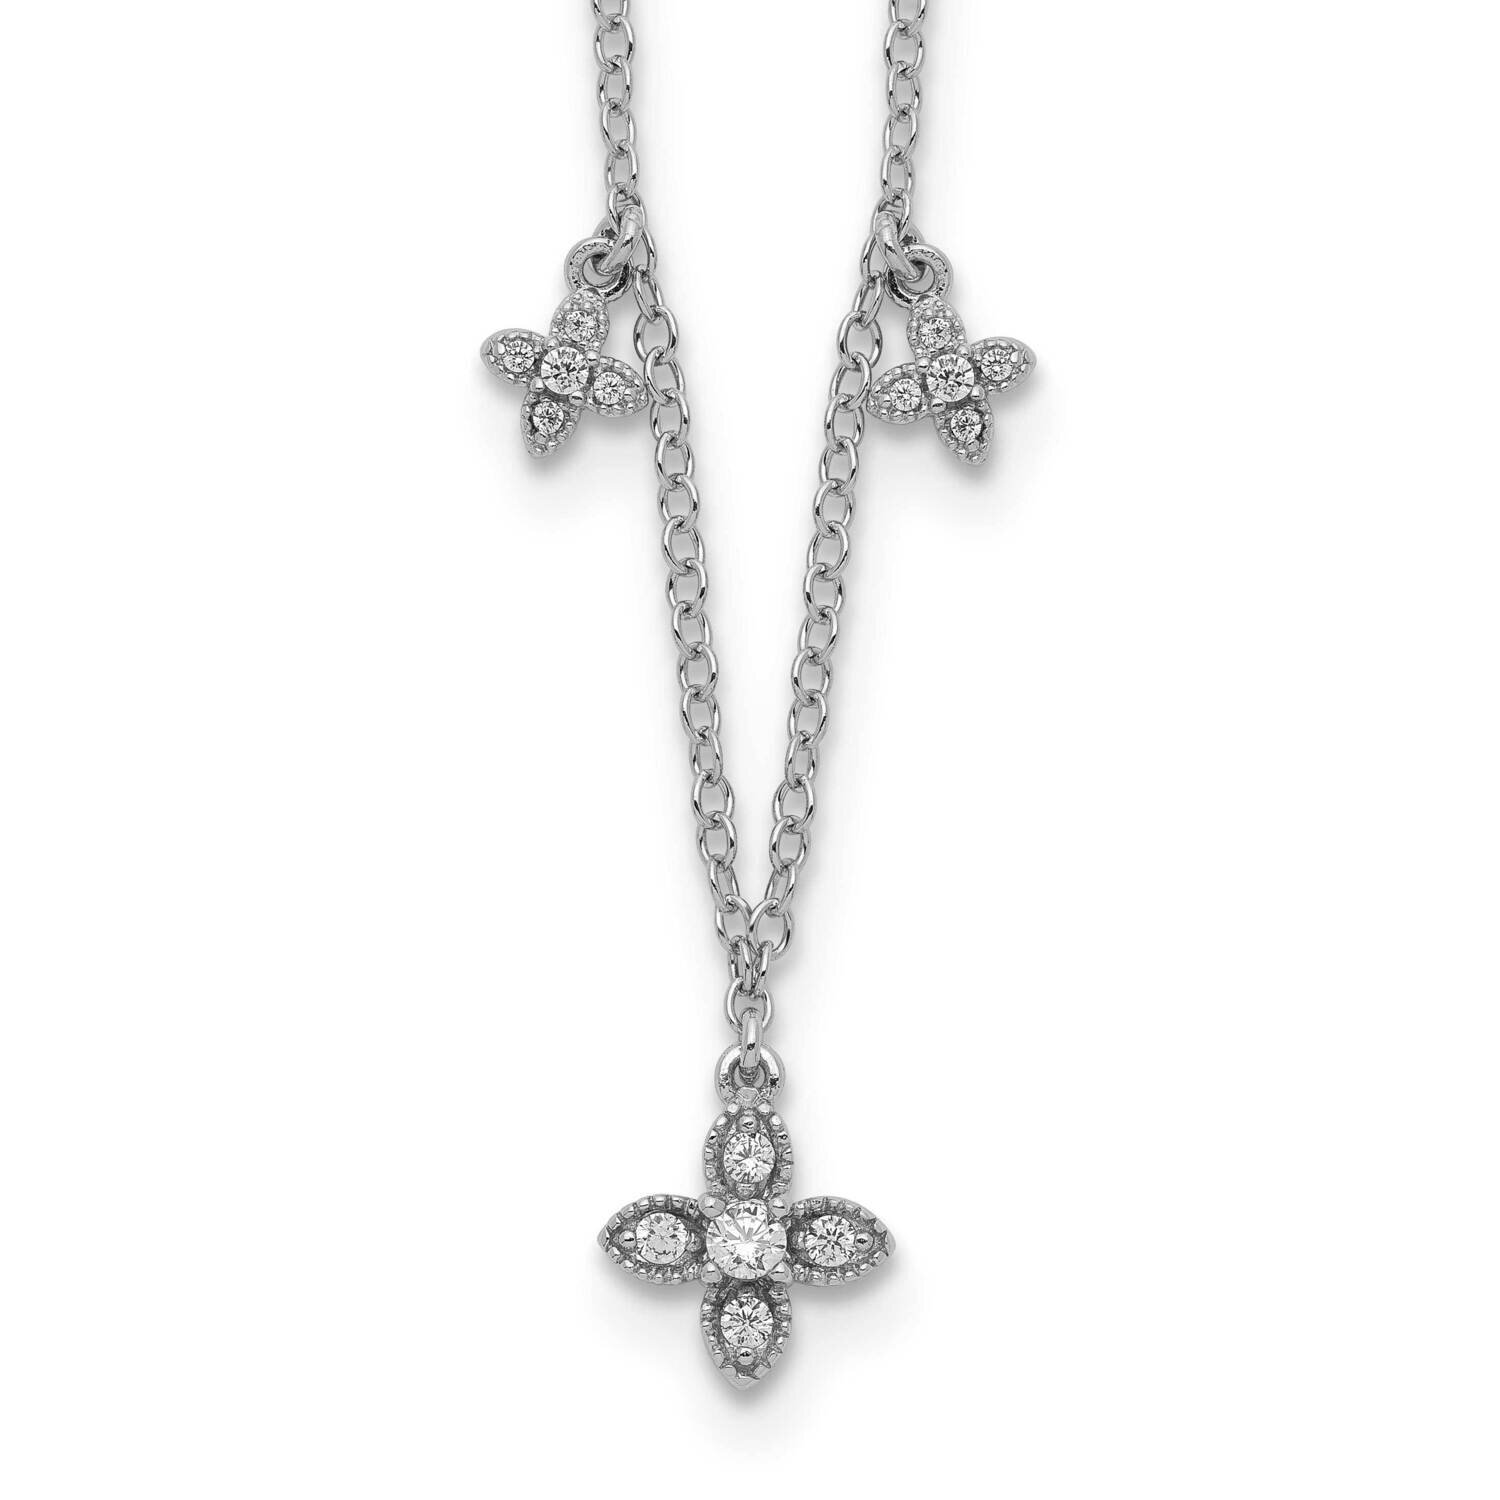 CZ Diamond Crosses with 2 Inch Extender Necklace 18 Inch Sterling Silver Rhodium-Plated QG5517-16